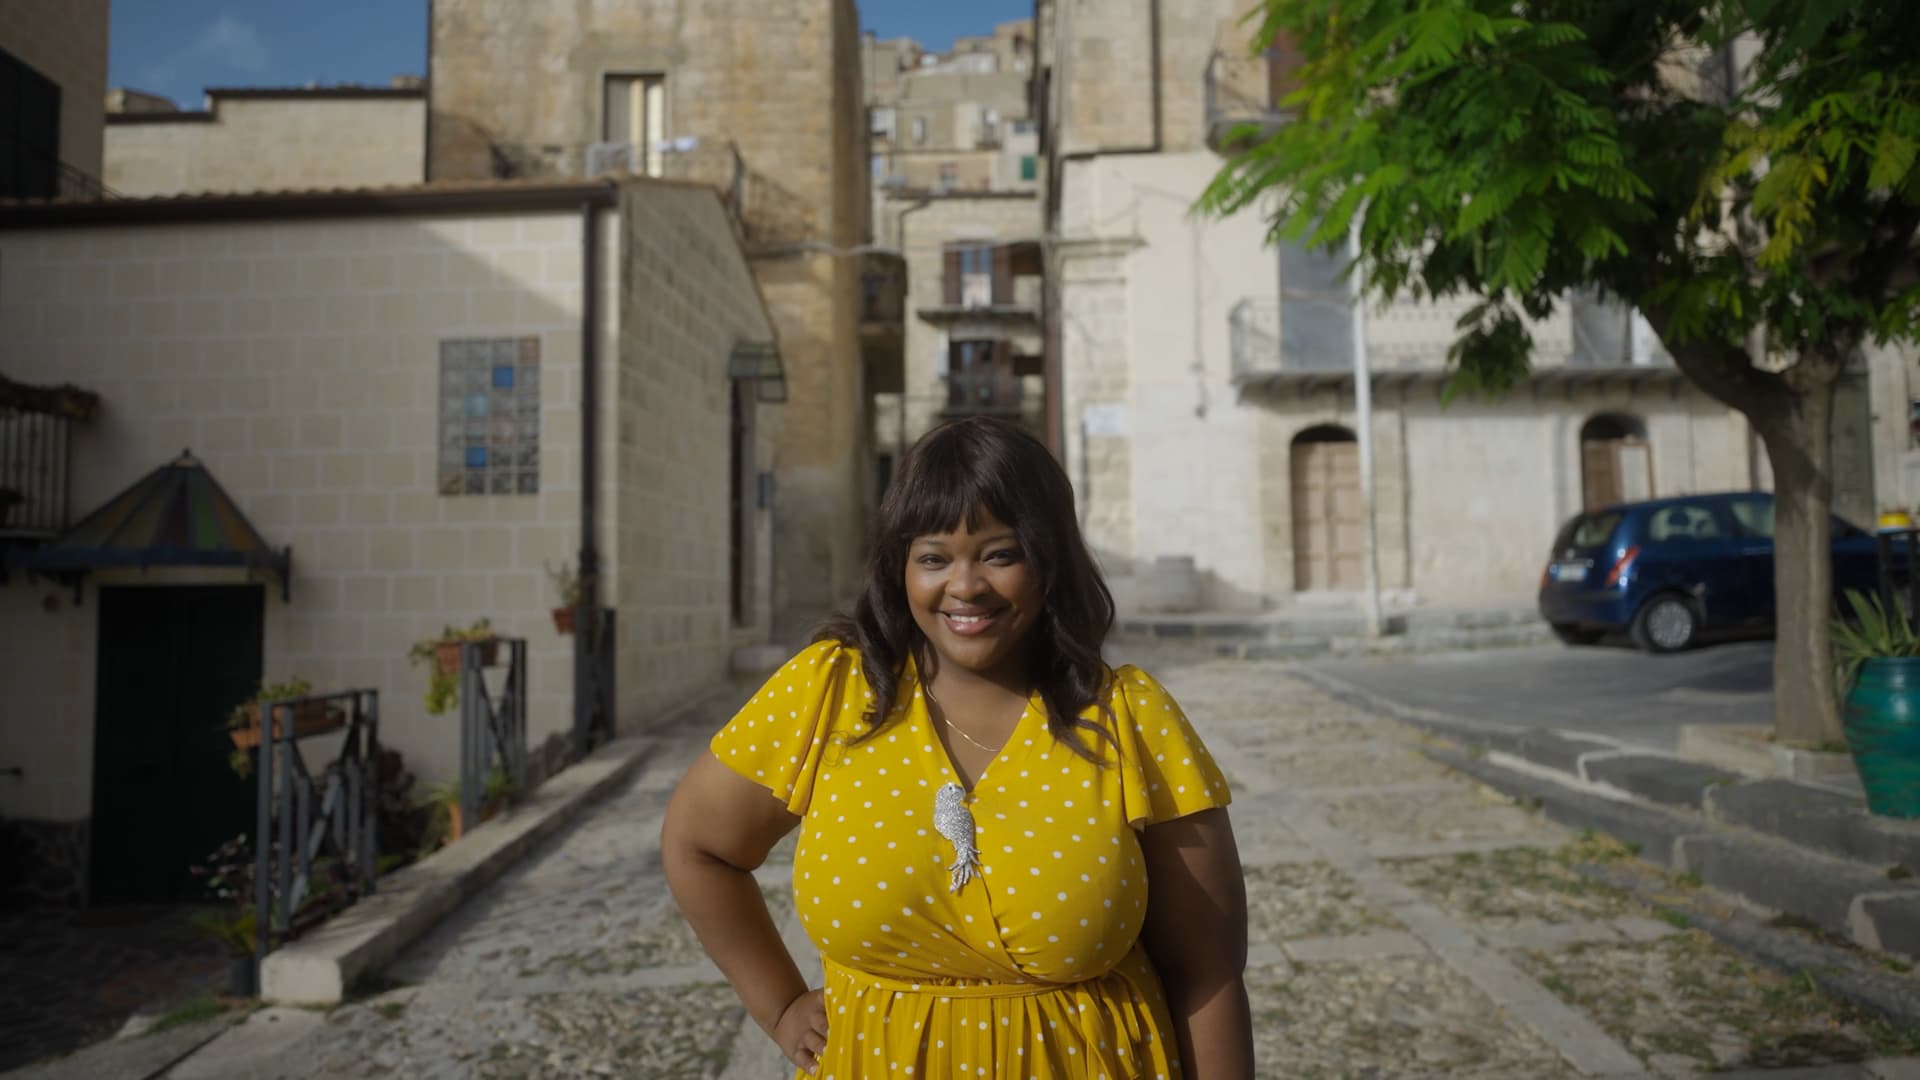 This 41-year-old works for herself and bought a house in Sicily for $62,000 — now she splits her time between Italy and the U.S.